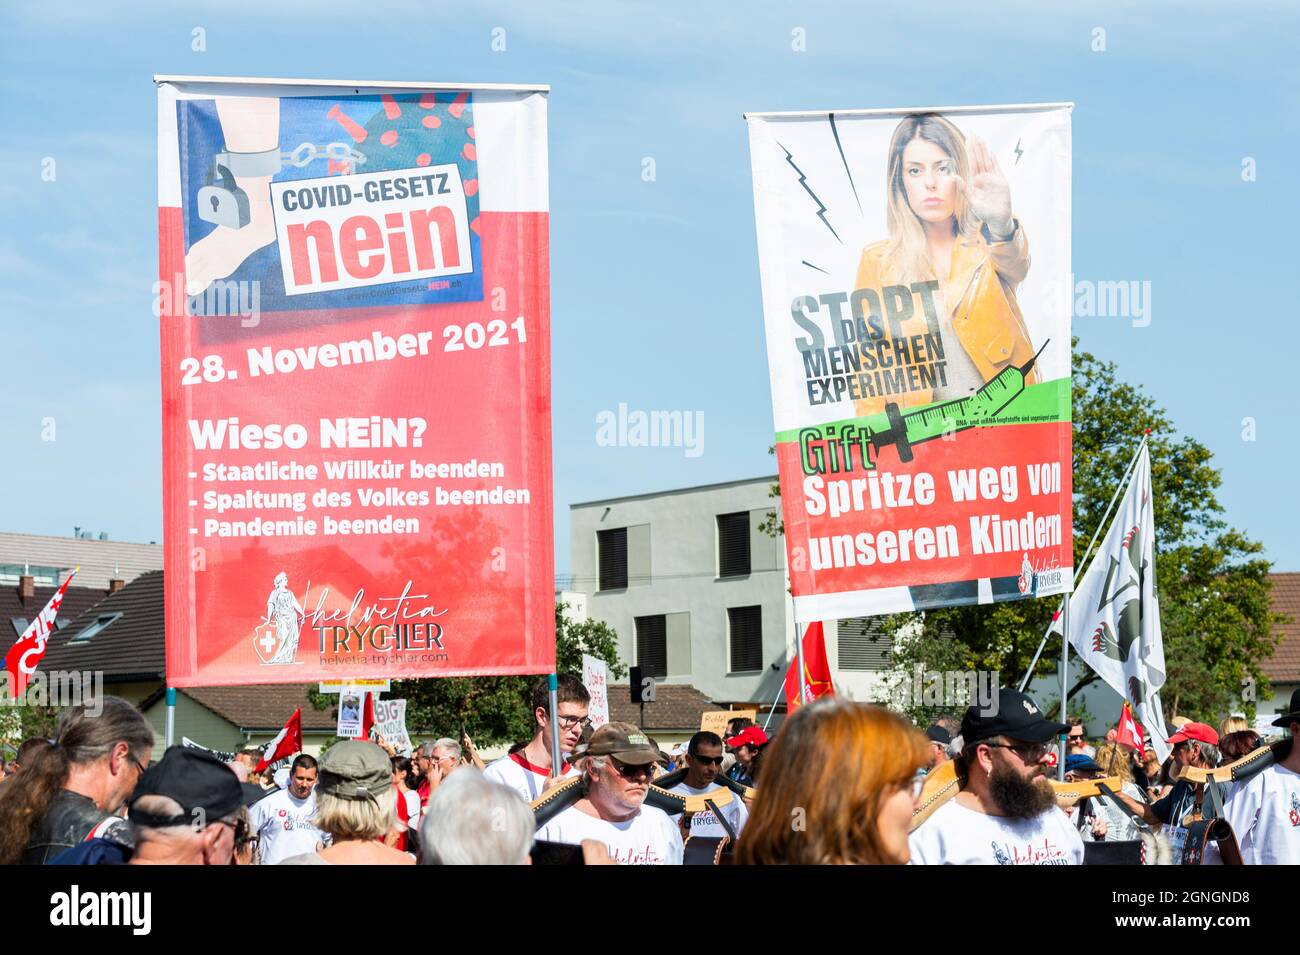 Corona Vaccine opponents are demonstrating againts the corona measures in Switzerland in Uster on the 25.09.21 Credit: Tim Eckert/Alamy Live News Credit: Tim Eckert/Alamy Live News Stock Photo